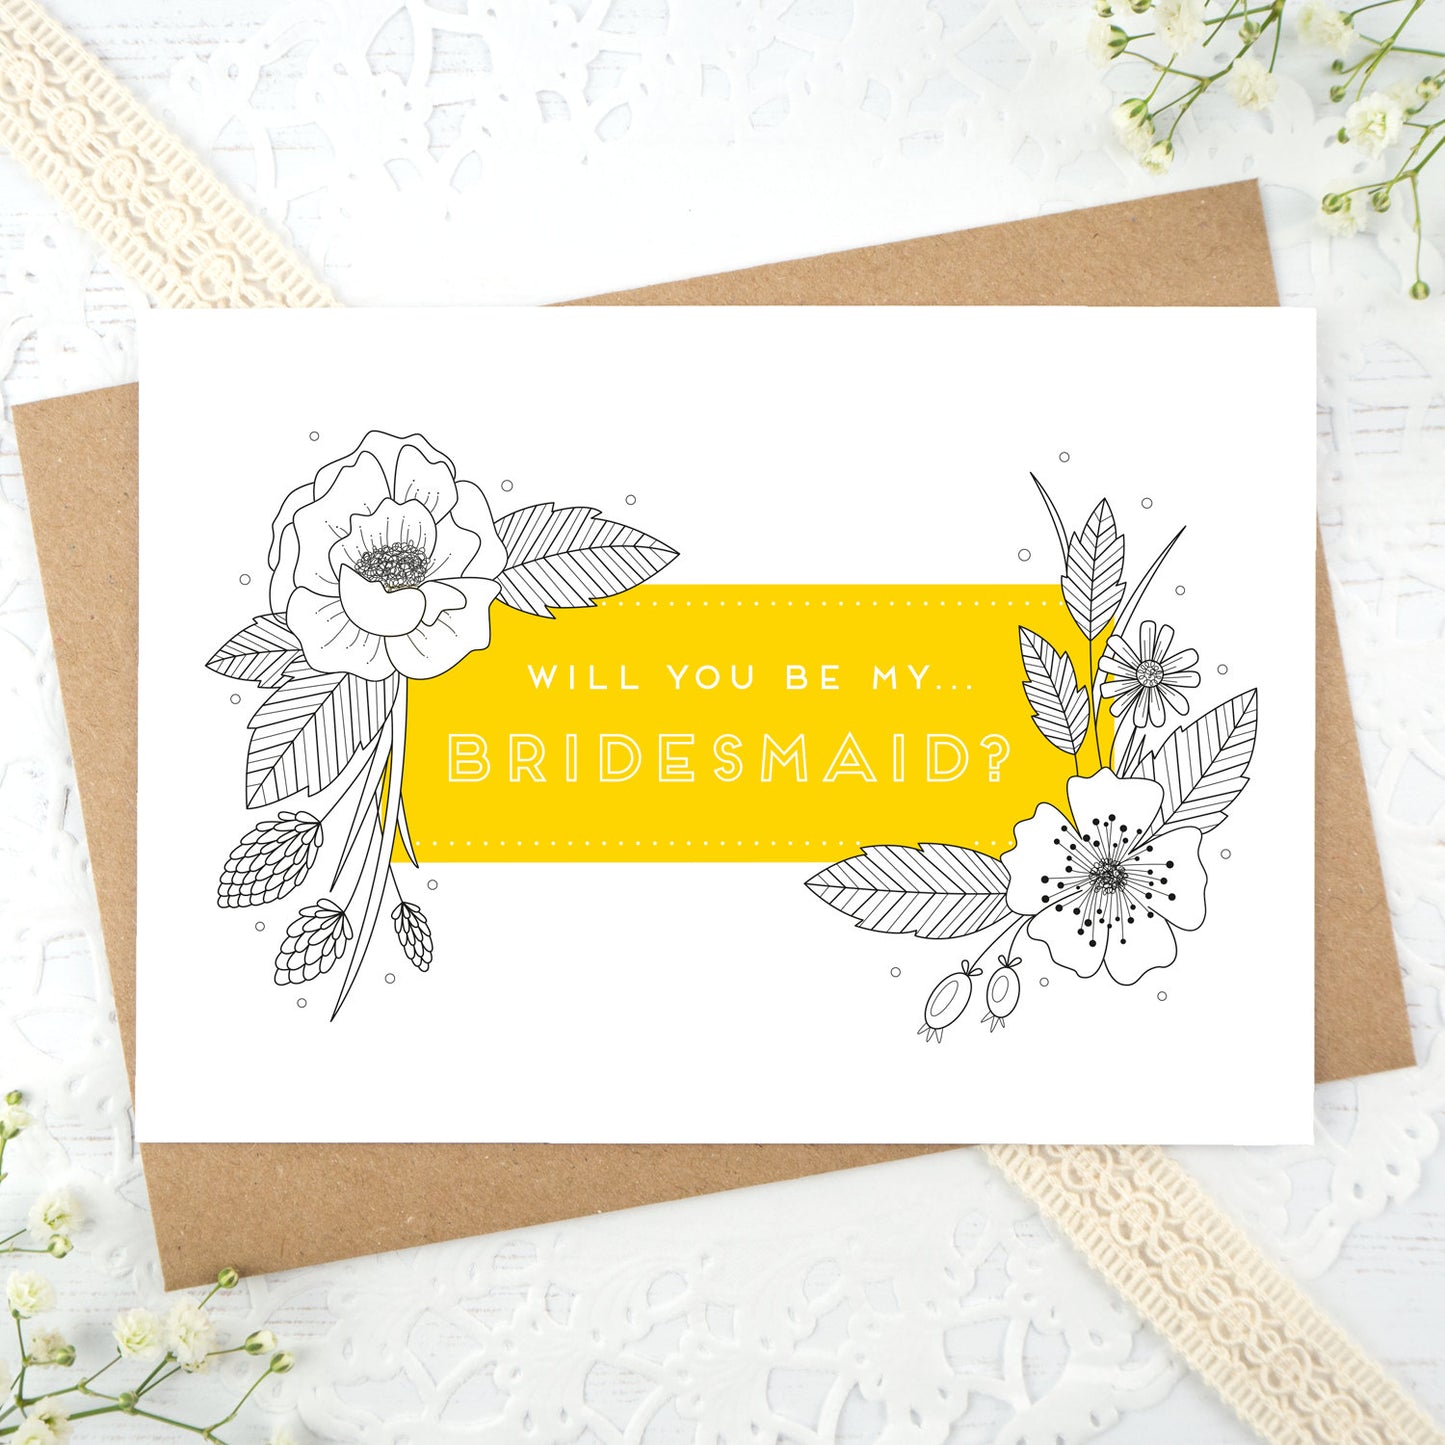 A floral outline, will you be my bridesmaid card in yellow